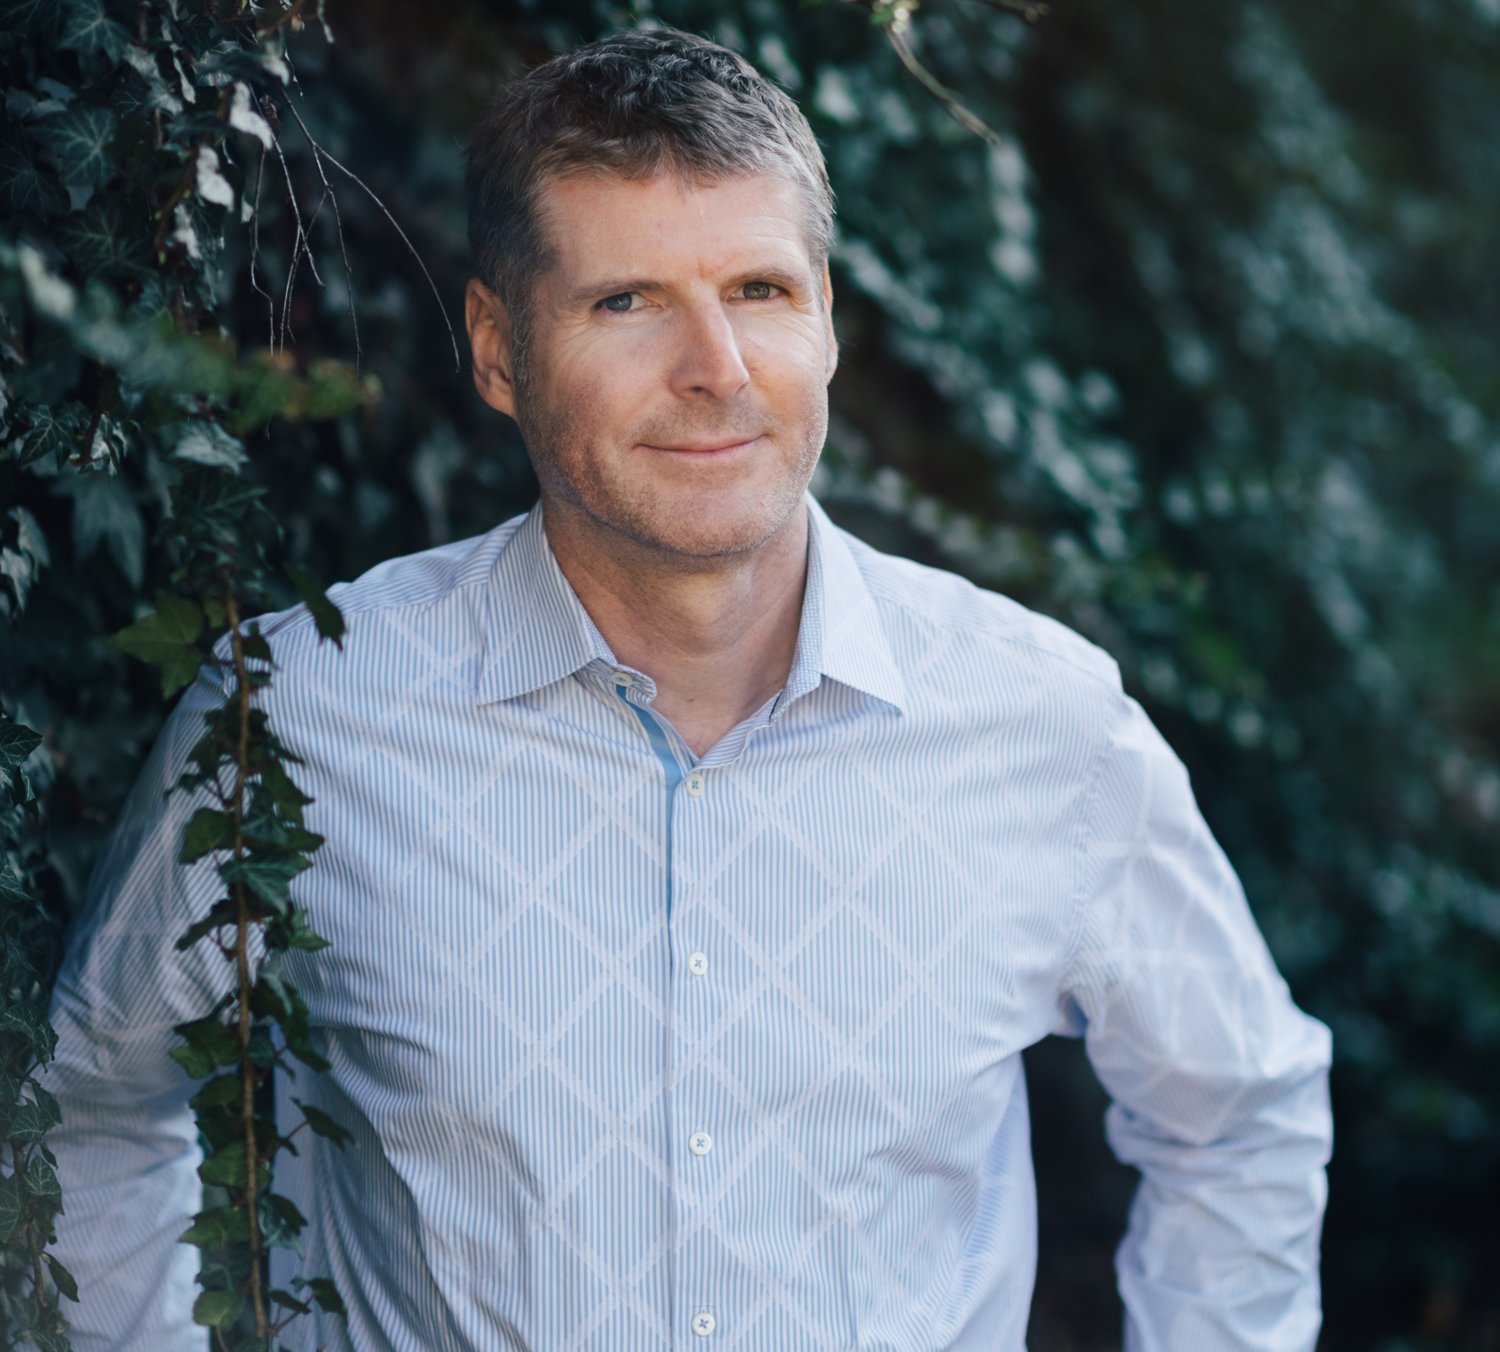 Portrait of Peder Olofsson in front of green bushes and dressed in a light-blue shirt.